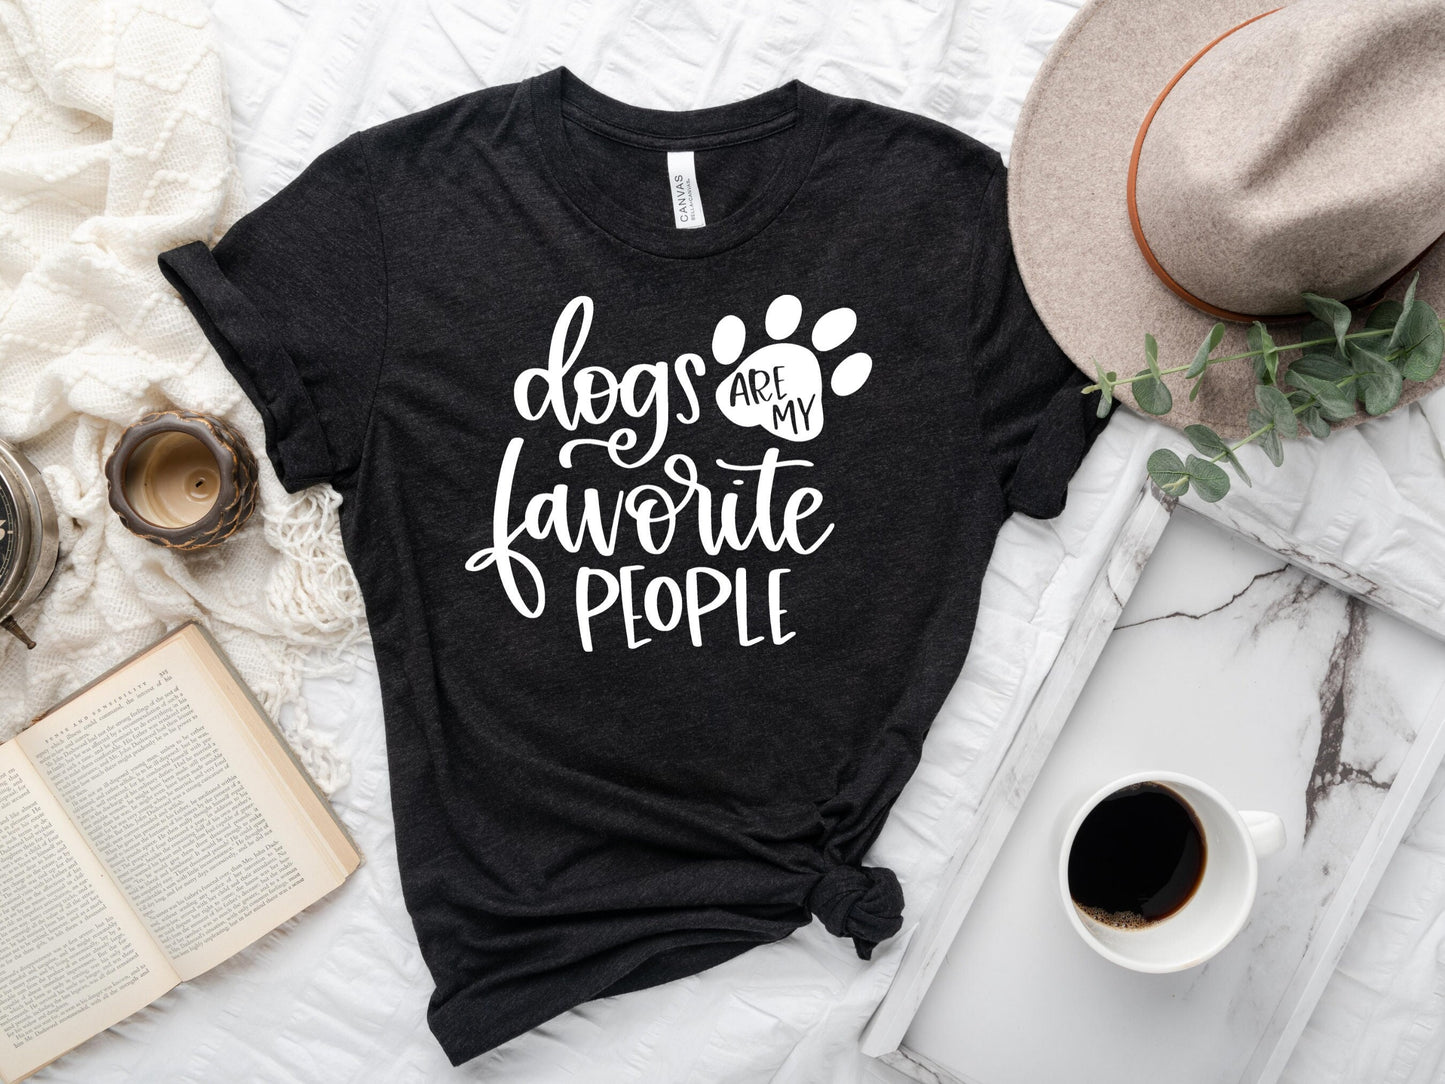 Dogs Are My Favorite People Shirt, Dog Lover Shirt, Dog Shirts, Dog Lover Gift, Dogs Are My Favorite, - Mardonyx T-Shirt Black Heather / S